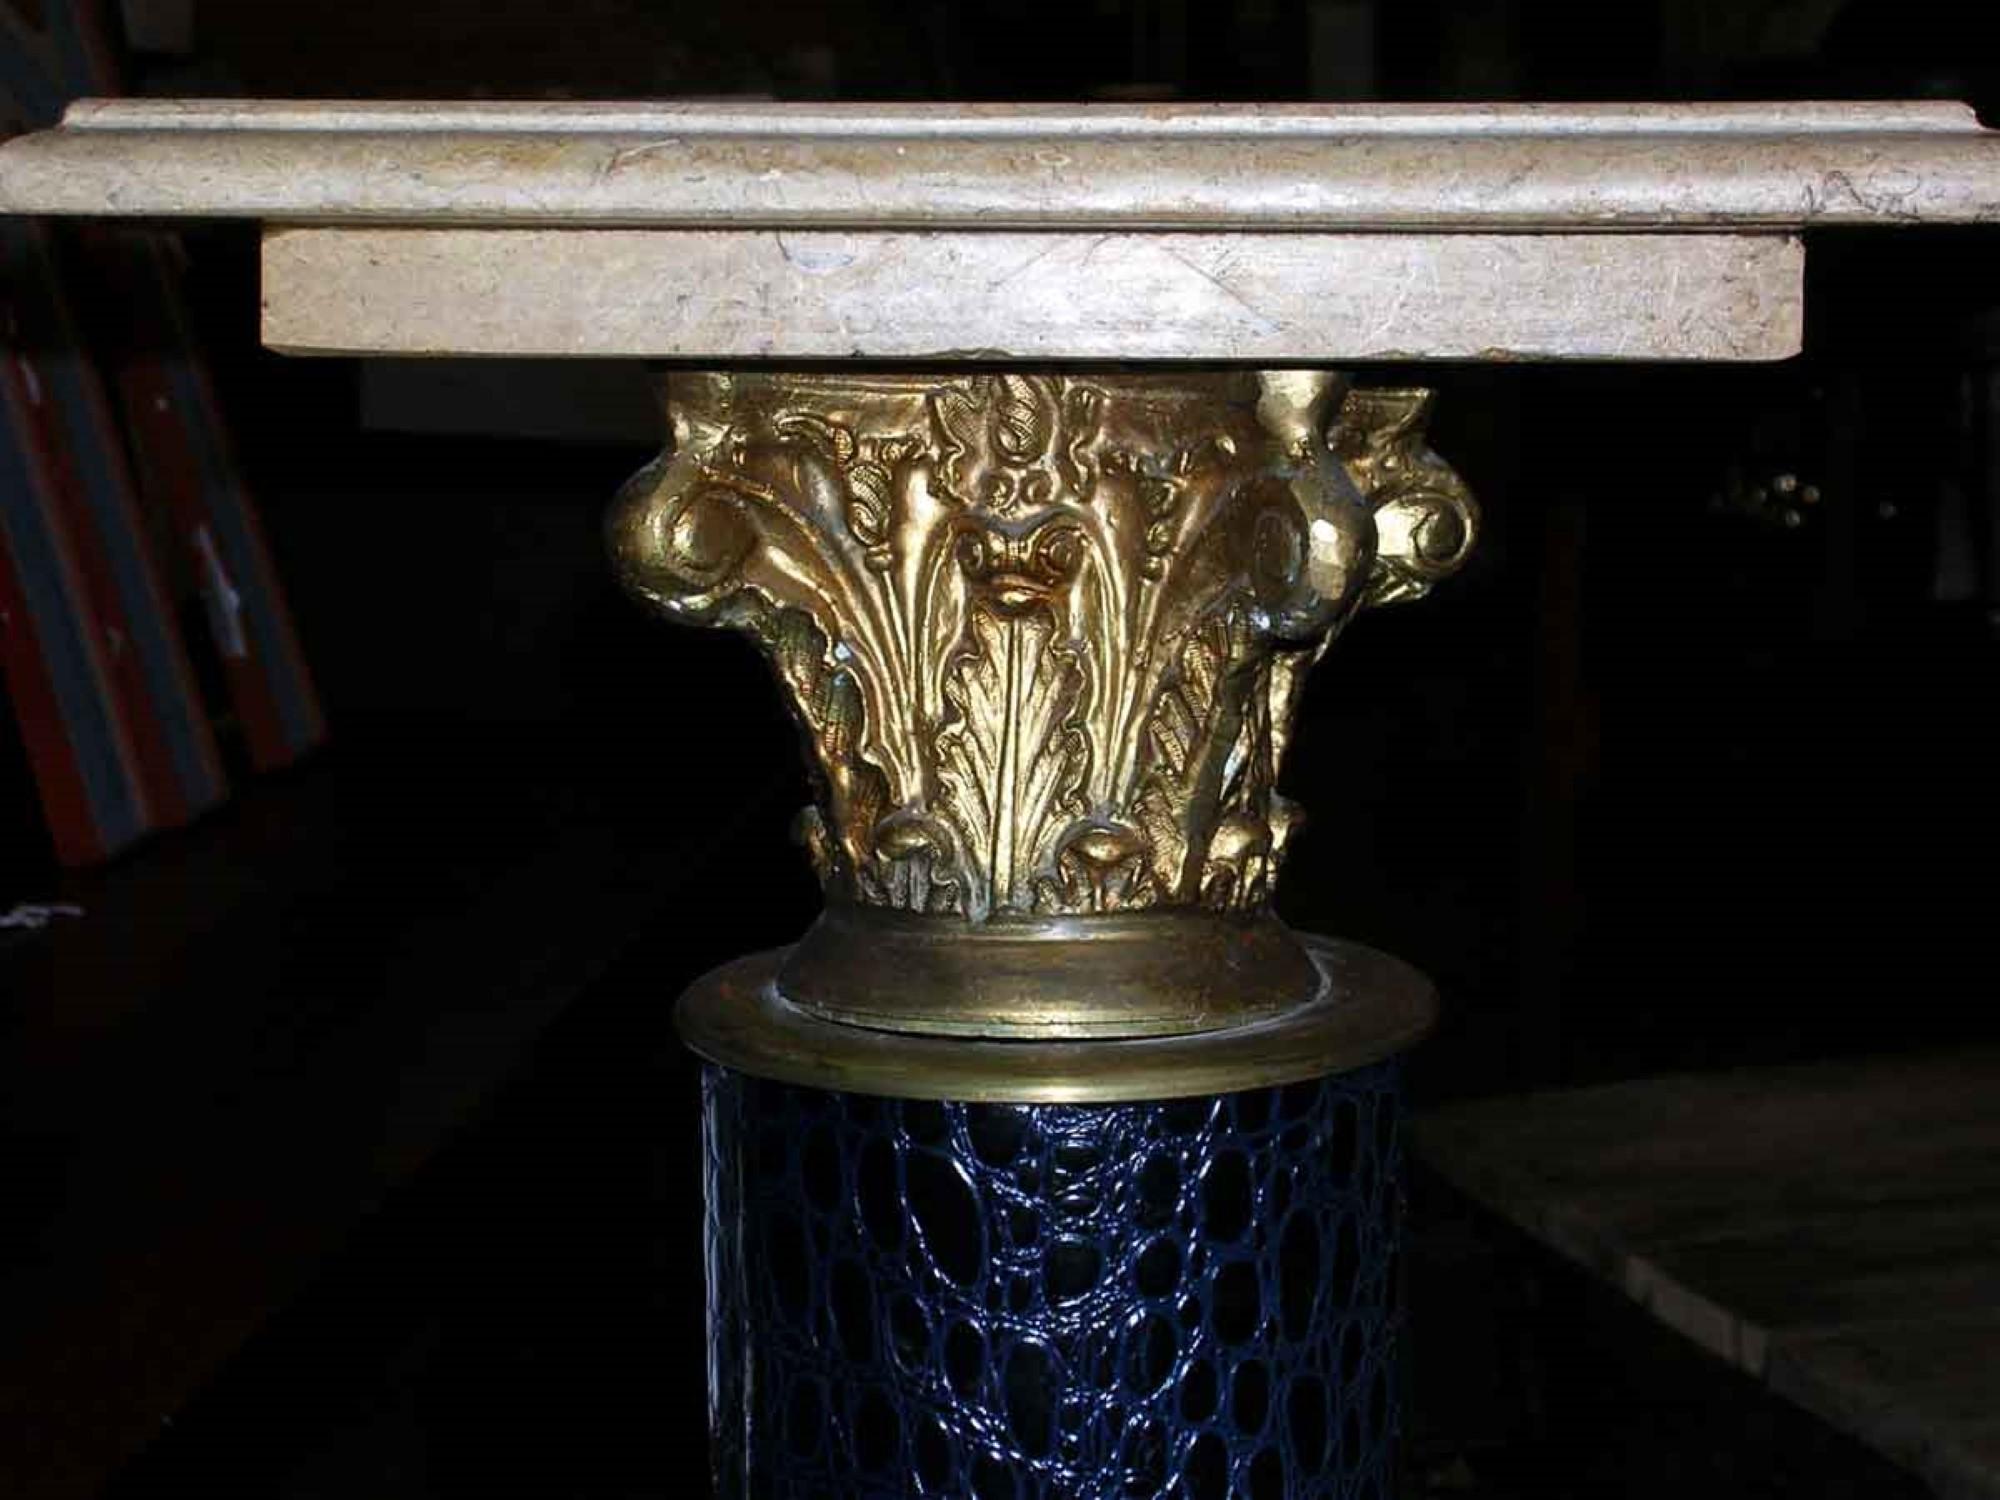 Early 20th Century hand carved ornate square marble pedestal decorated with various bronze appliques such as these imaginative ferns and a Corinthian capital. This can be seen at our 400 Gilligan St location in Scranton, PA.